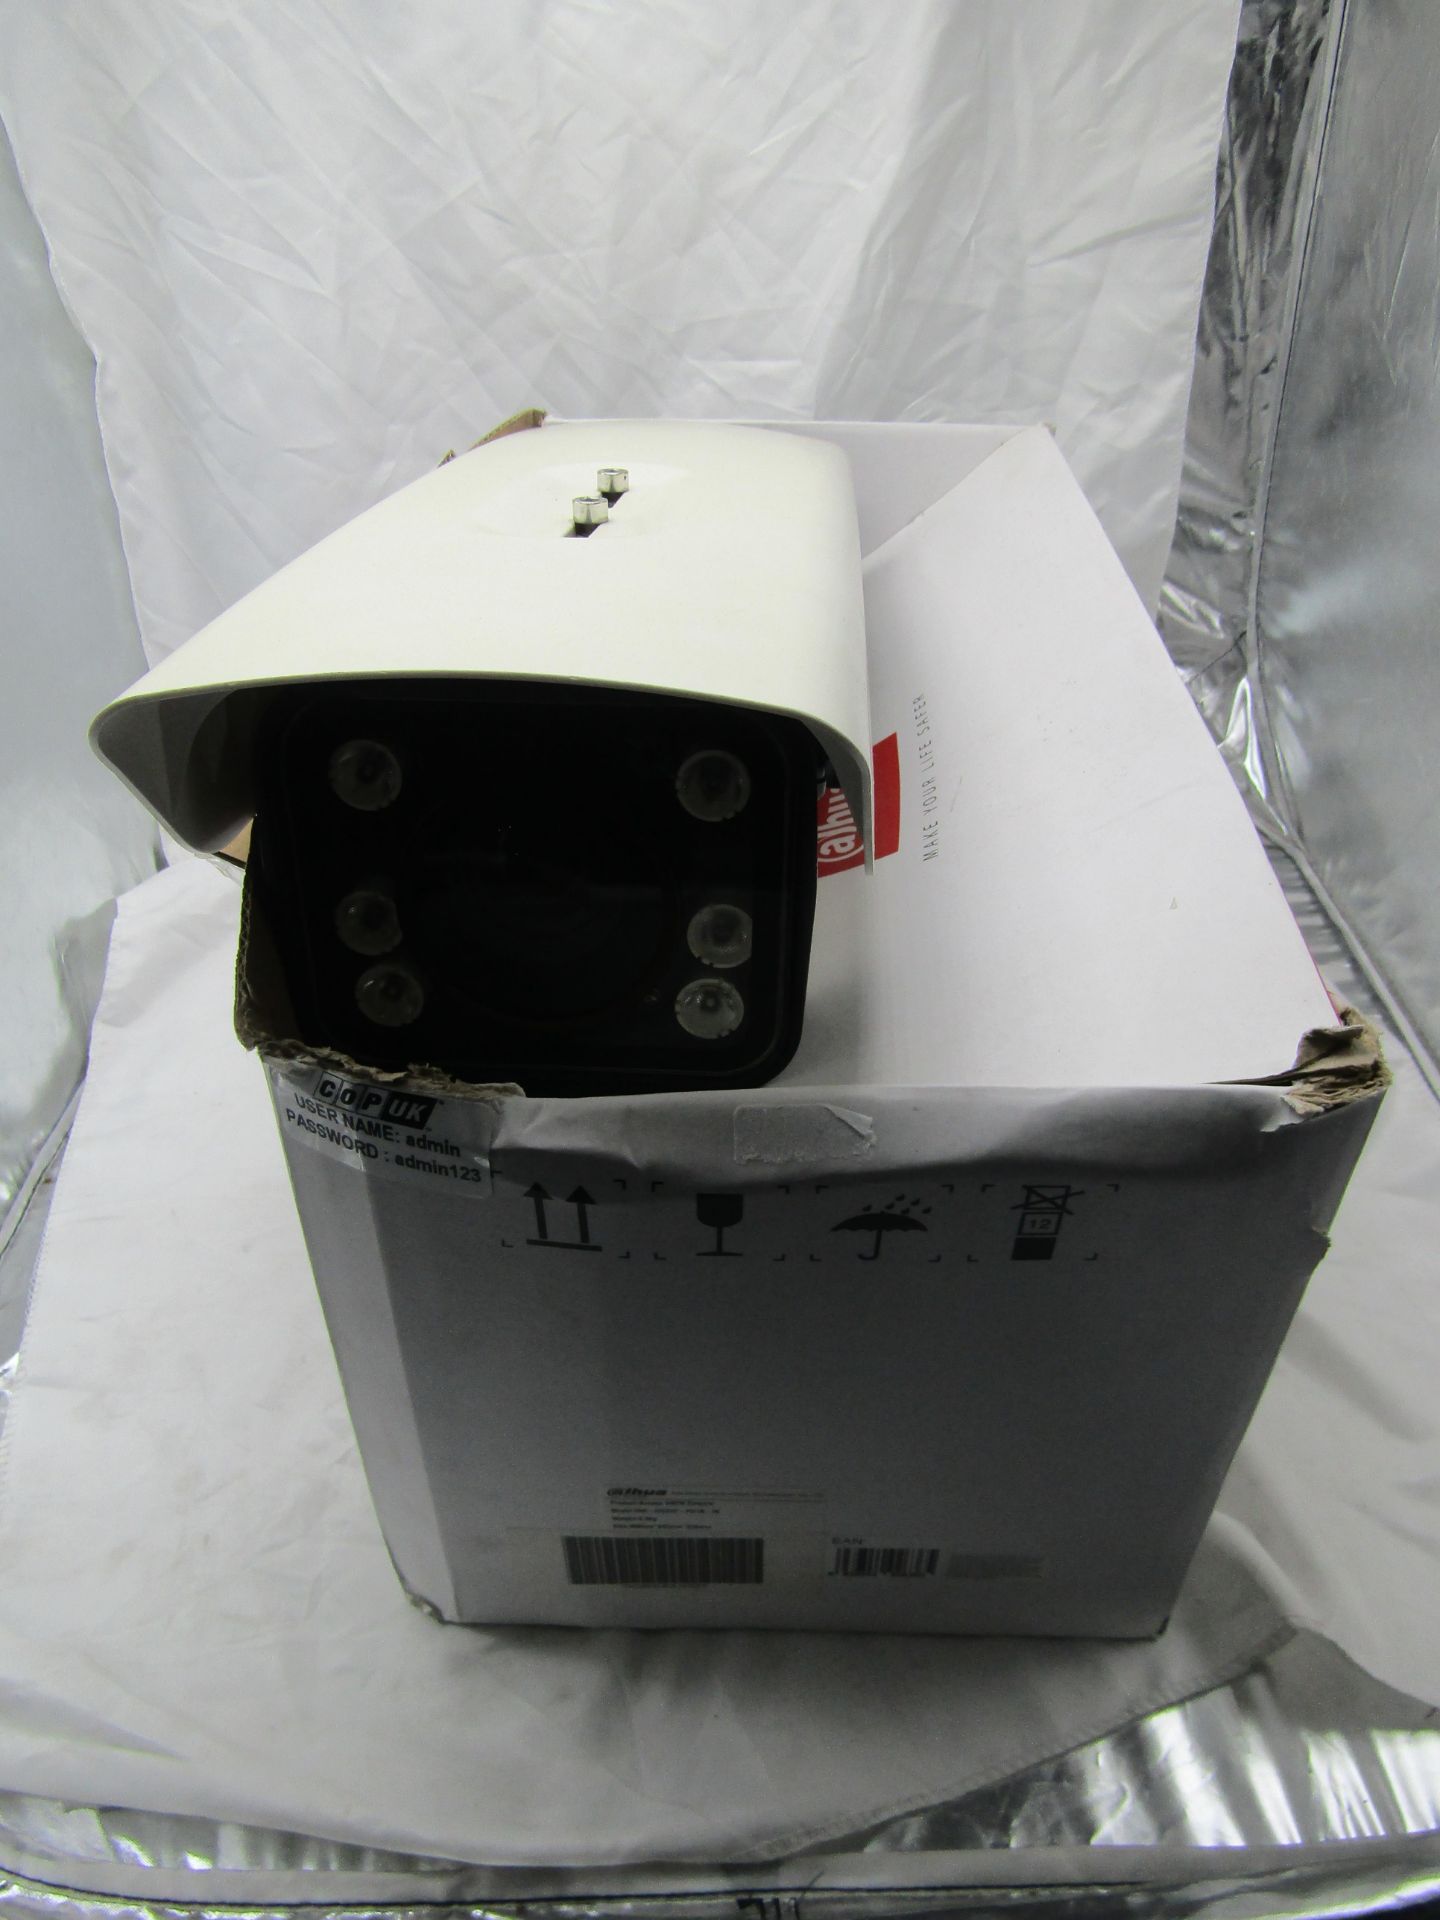 one lot of over 200 items of CCTV and Surveillance equipment, includes DVRs, Cameras, Thermal - Image 91 of 104